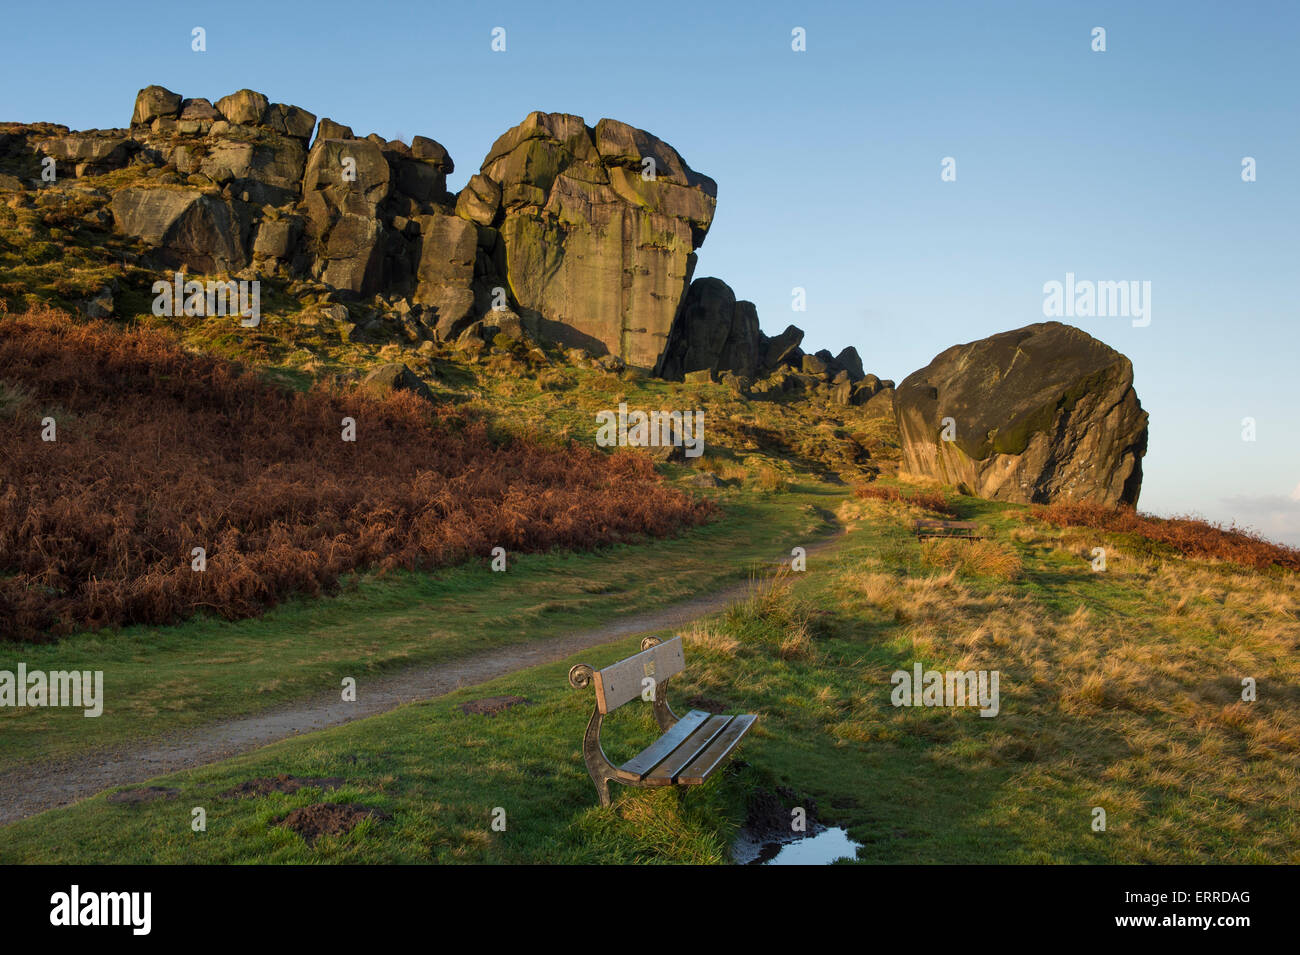 Scenic rural landscape of blue sky & early winter morning sunlight on a rocky outcrop - Cow and Calf Rocks, Ilkley Moor, West Yorkshire, England, UK. Stock Photo